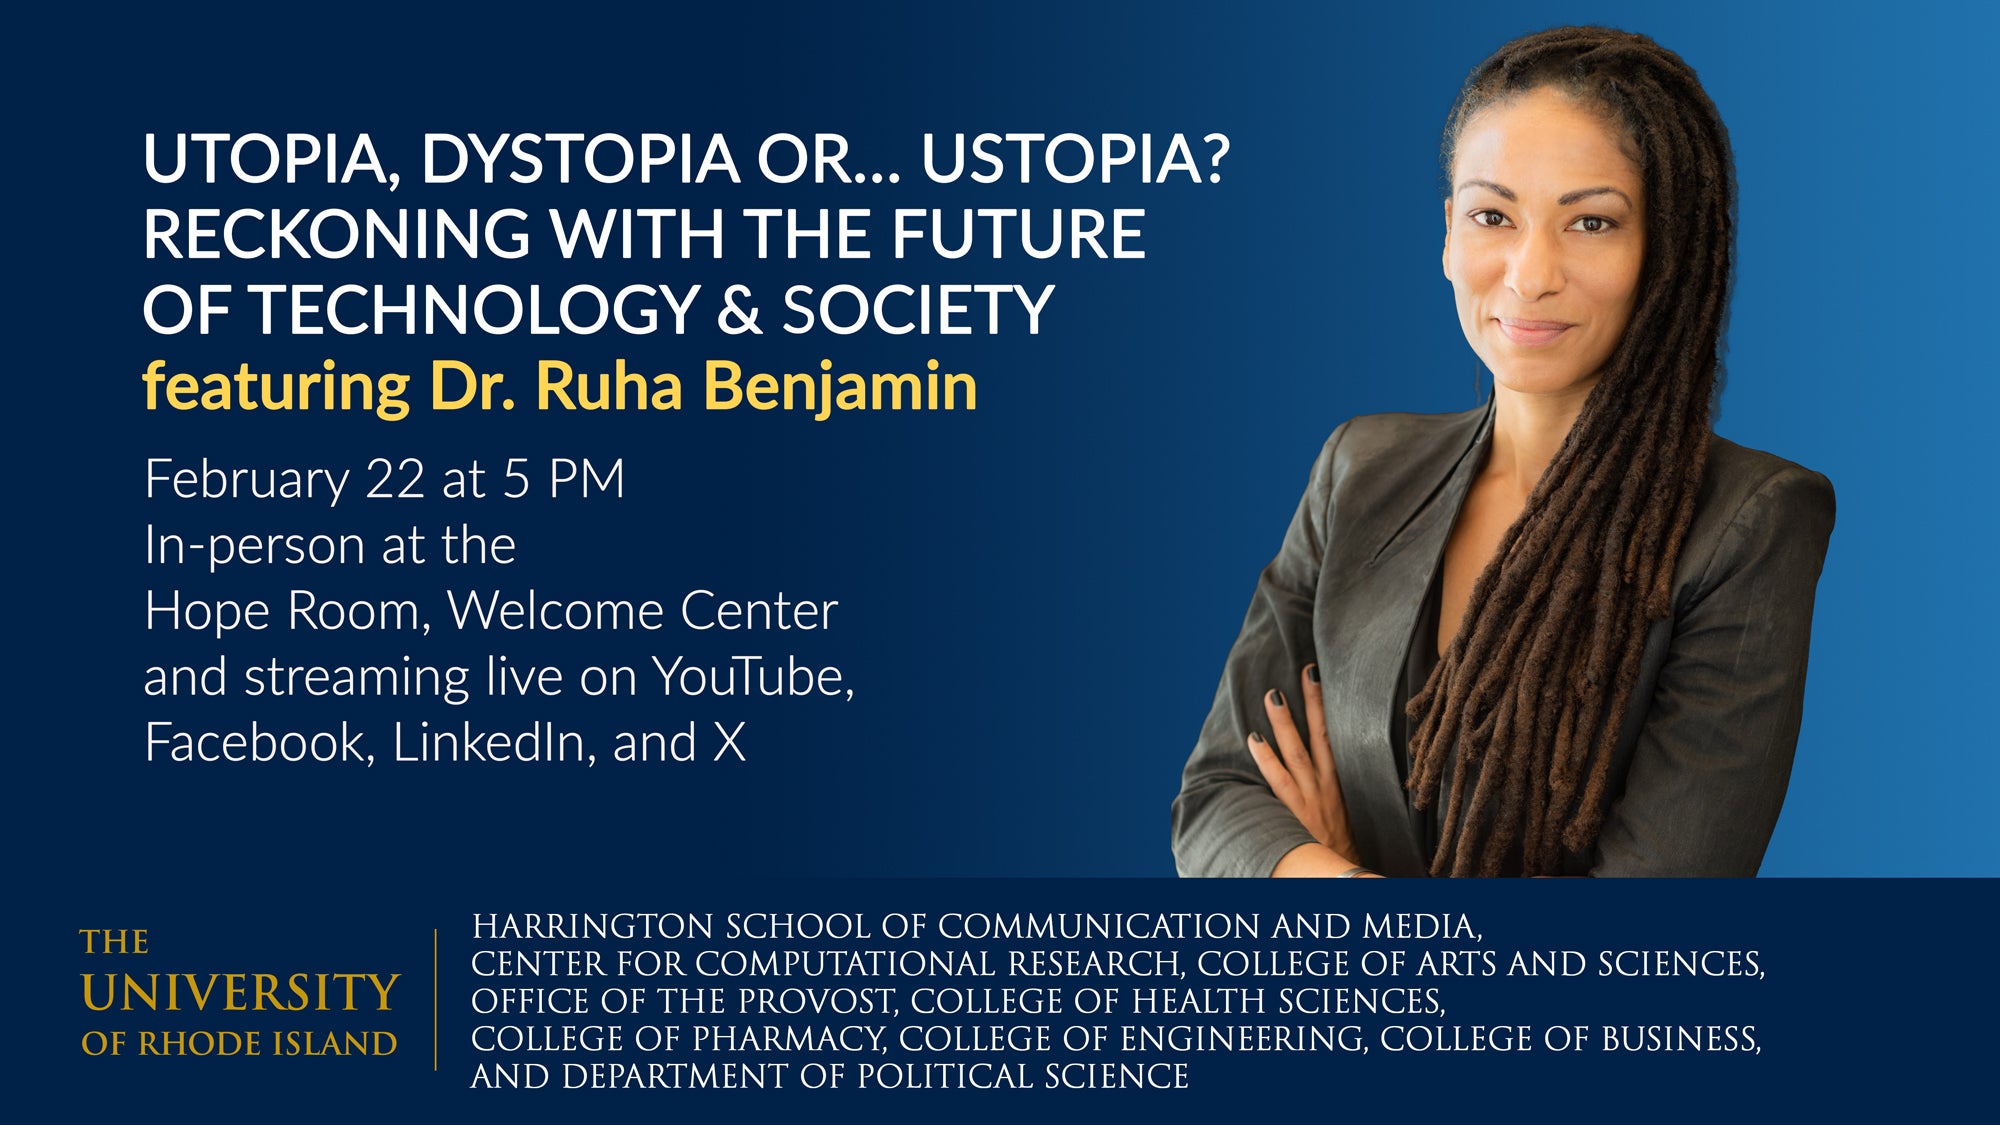 Utopia, Dystopia or… Ustopia? Reckoning with the Future of Technology & Society featuring Dr. Ruha Benjamin